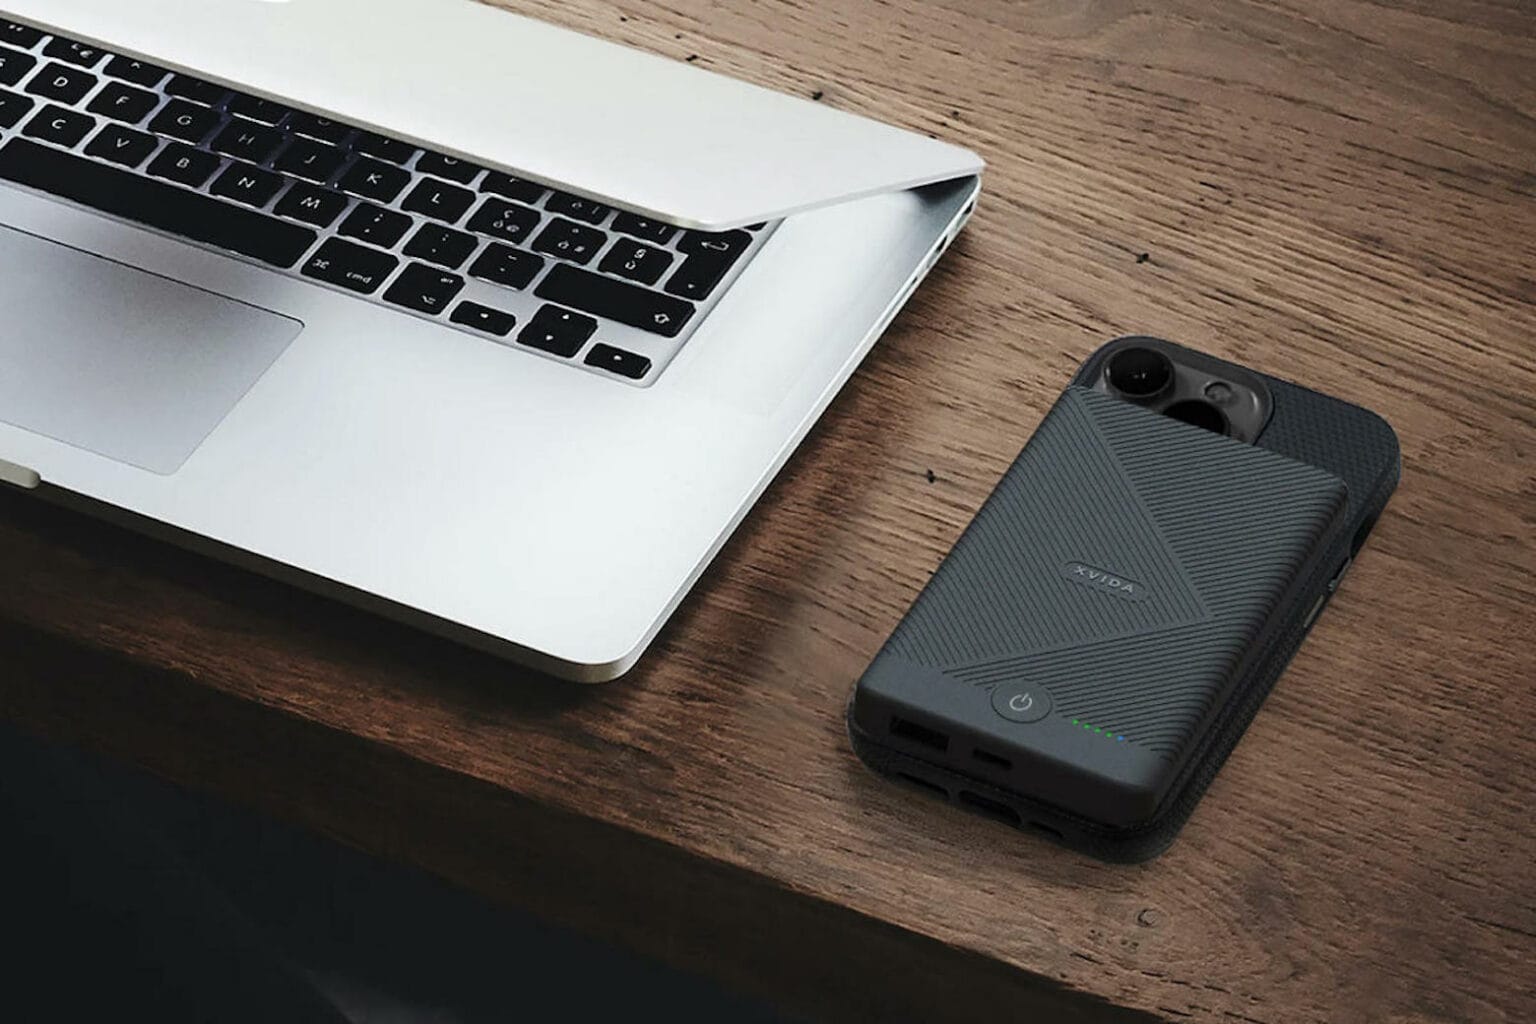 Get this slim power bank for $47 during the pre-black Friday sale.